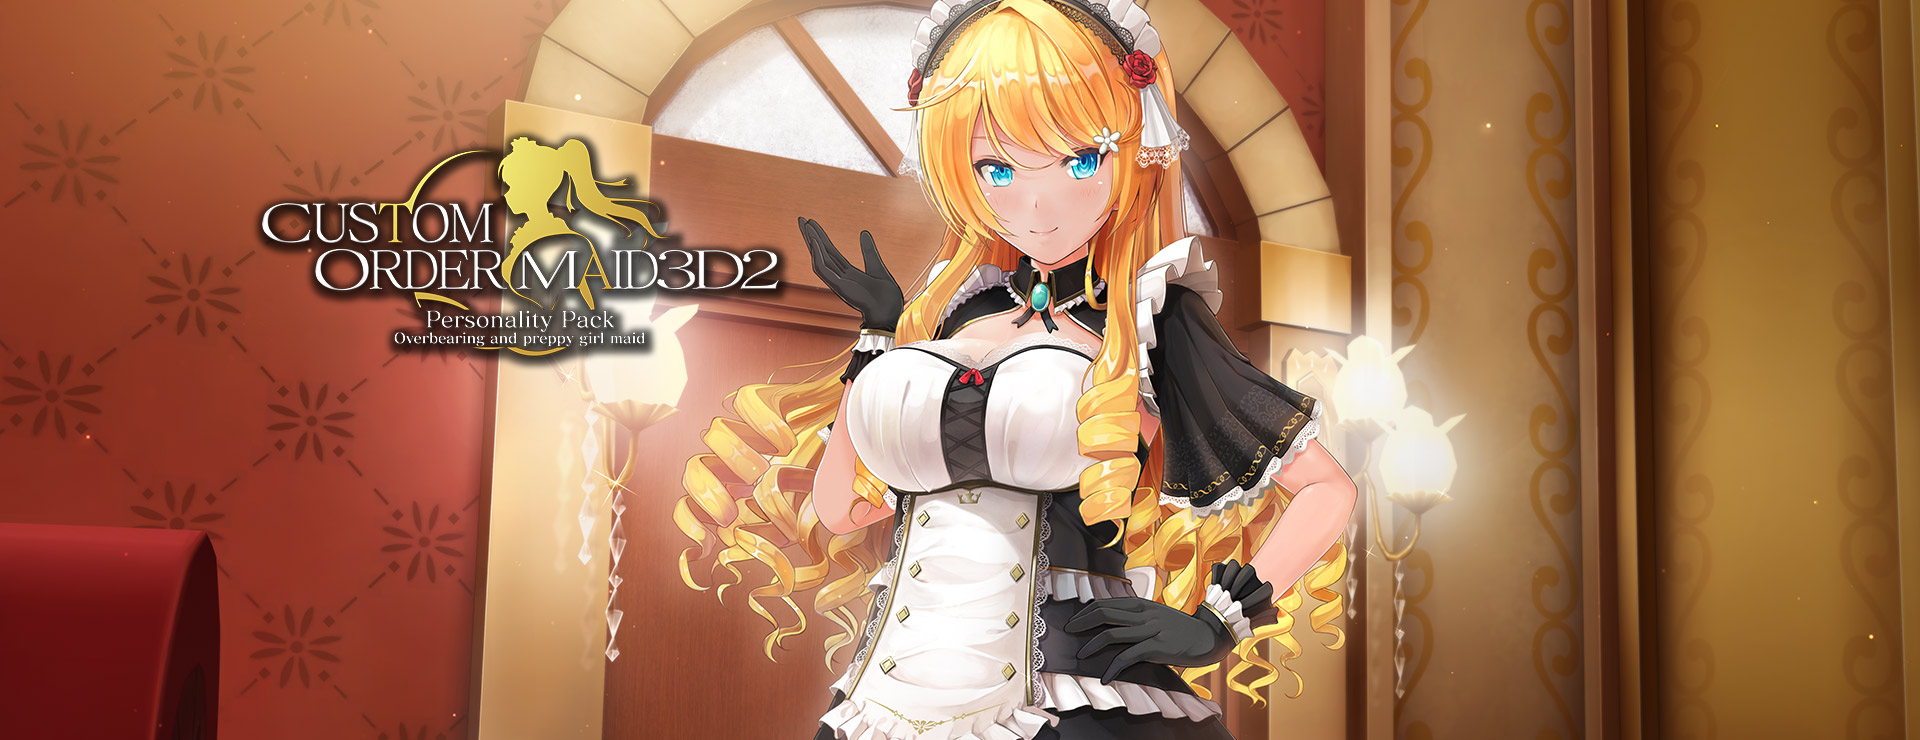 Custom Order Maid 3D 2: Overbearing and Preppy Girl Maid Complete Bundle - Symulacja Gra